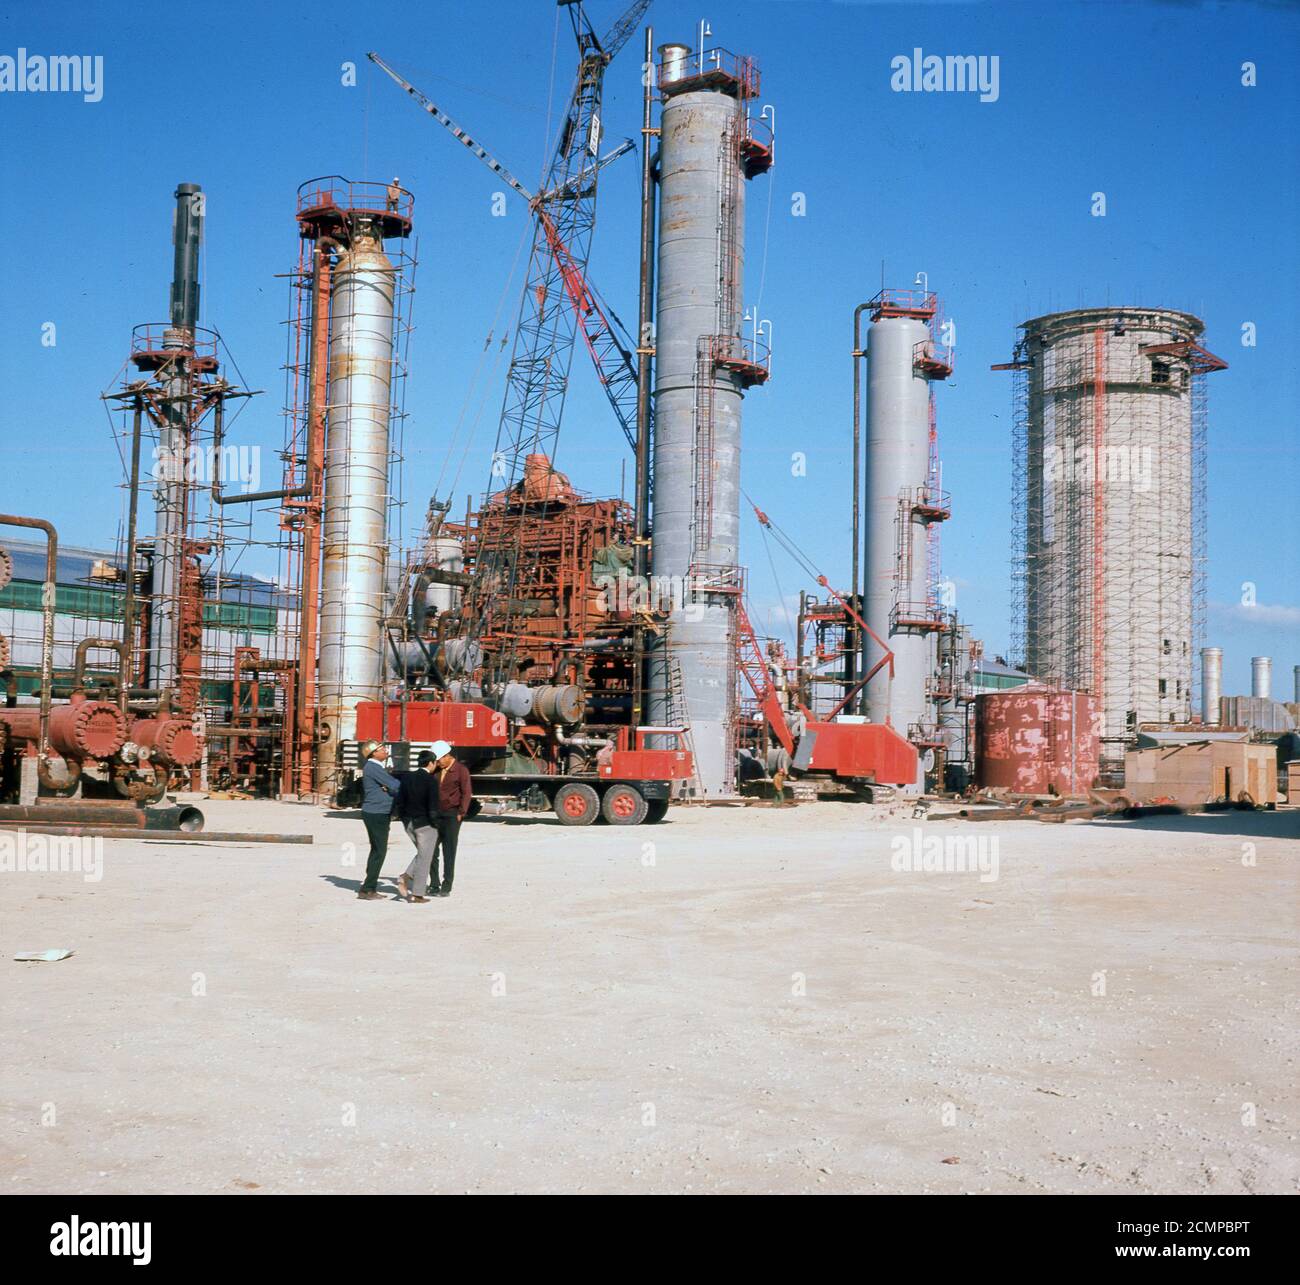 1960s, Saudi Arabia, Dammam, exterior picture showing a new fertiliser factory being built for the Saudi Arabia Fertilizer Company. SAFCO was the first petrochemical company in the country, established in 1965 and grew to be one of the largest producers of chemicals in the world. Stock Photo